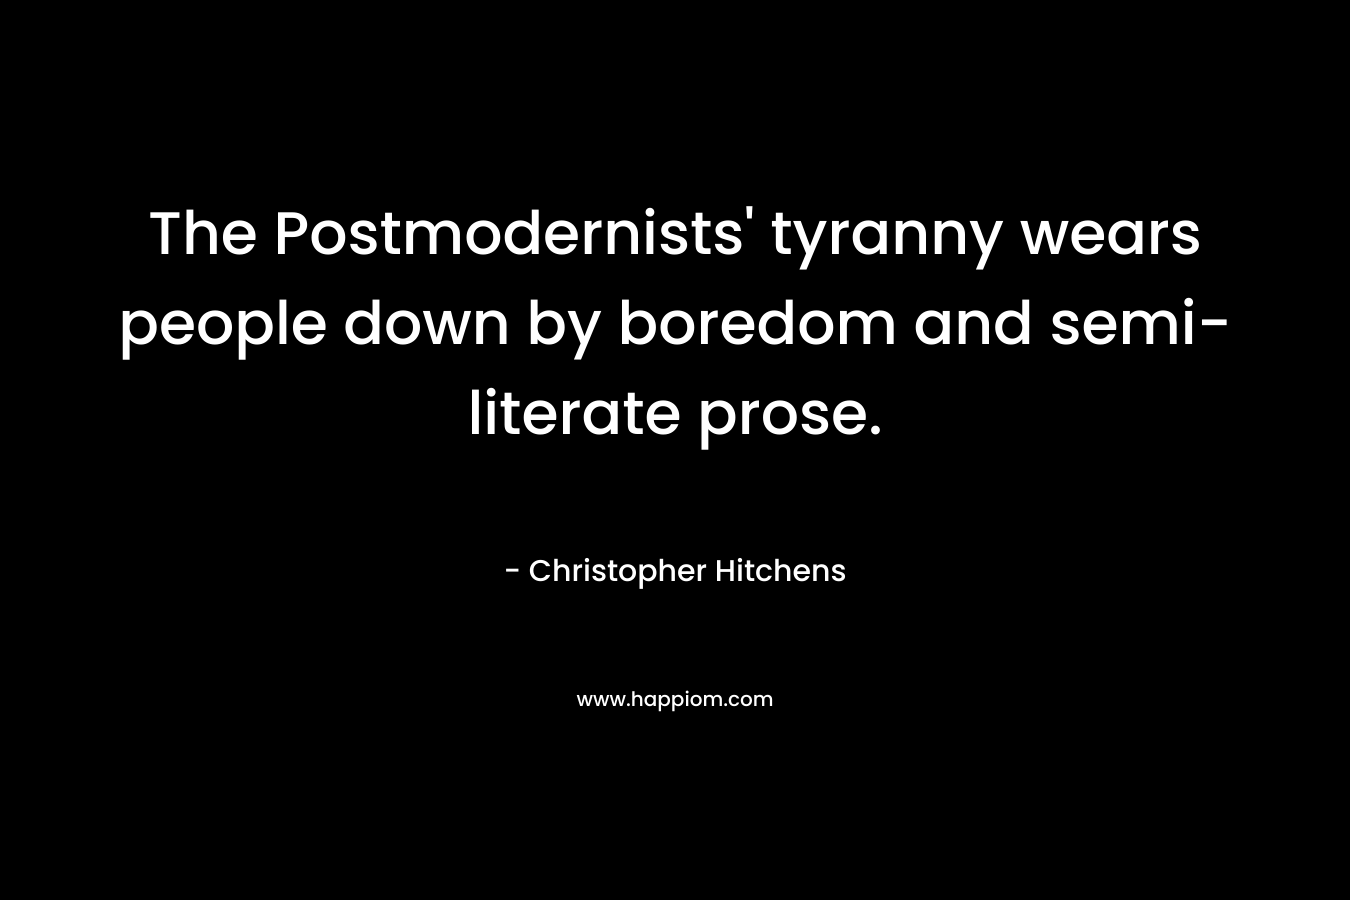 The Postmodernists’ tyranny wears people down by boredom and semi-literate prose. – Christopher Hitchens